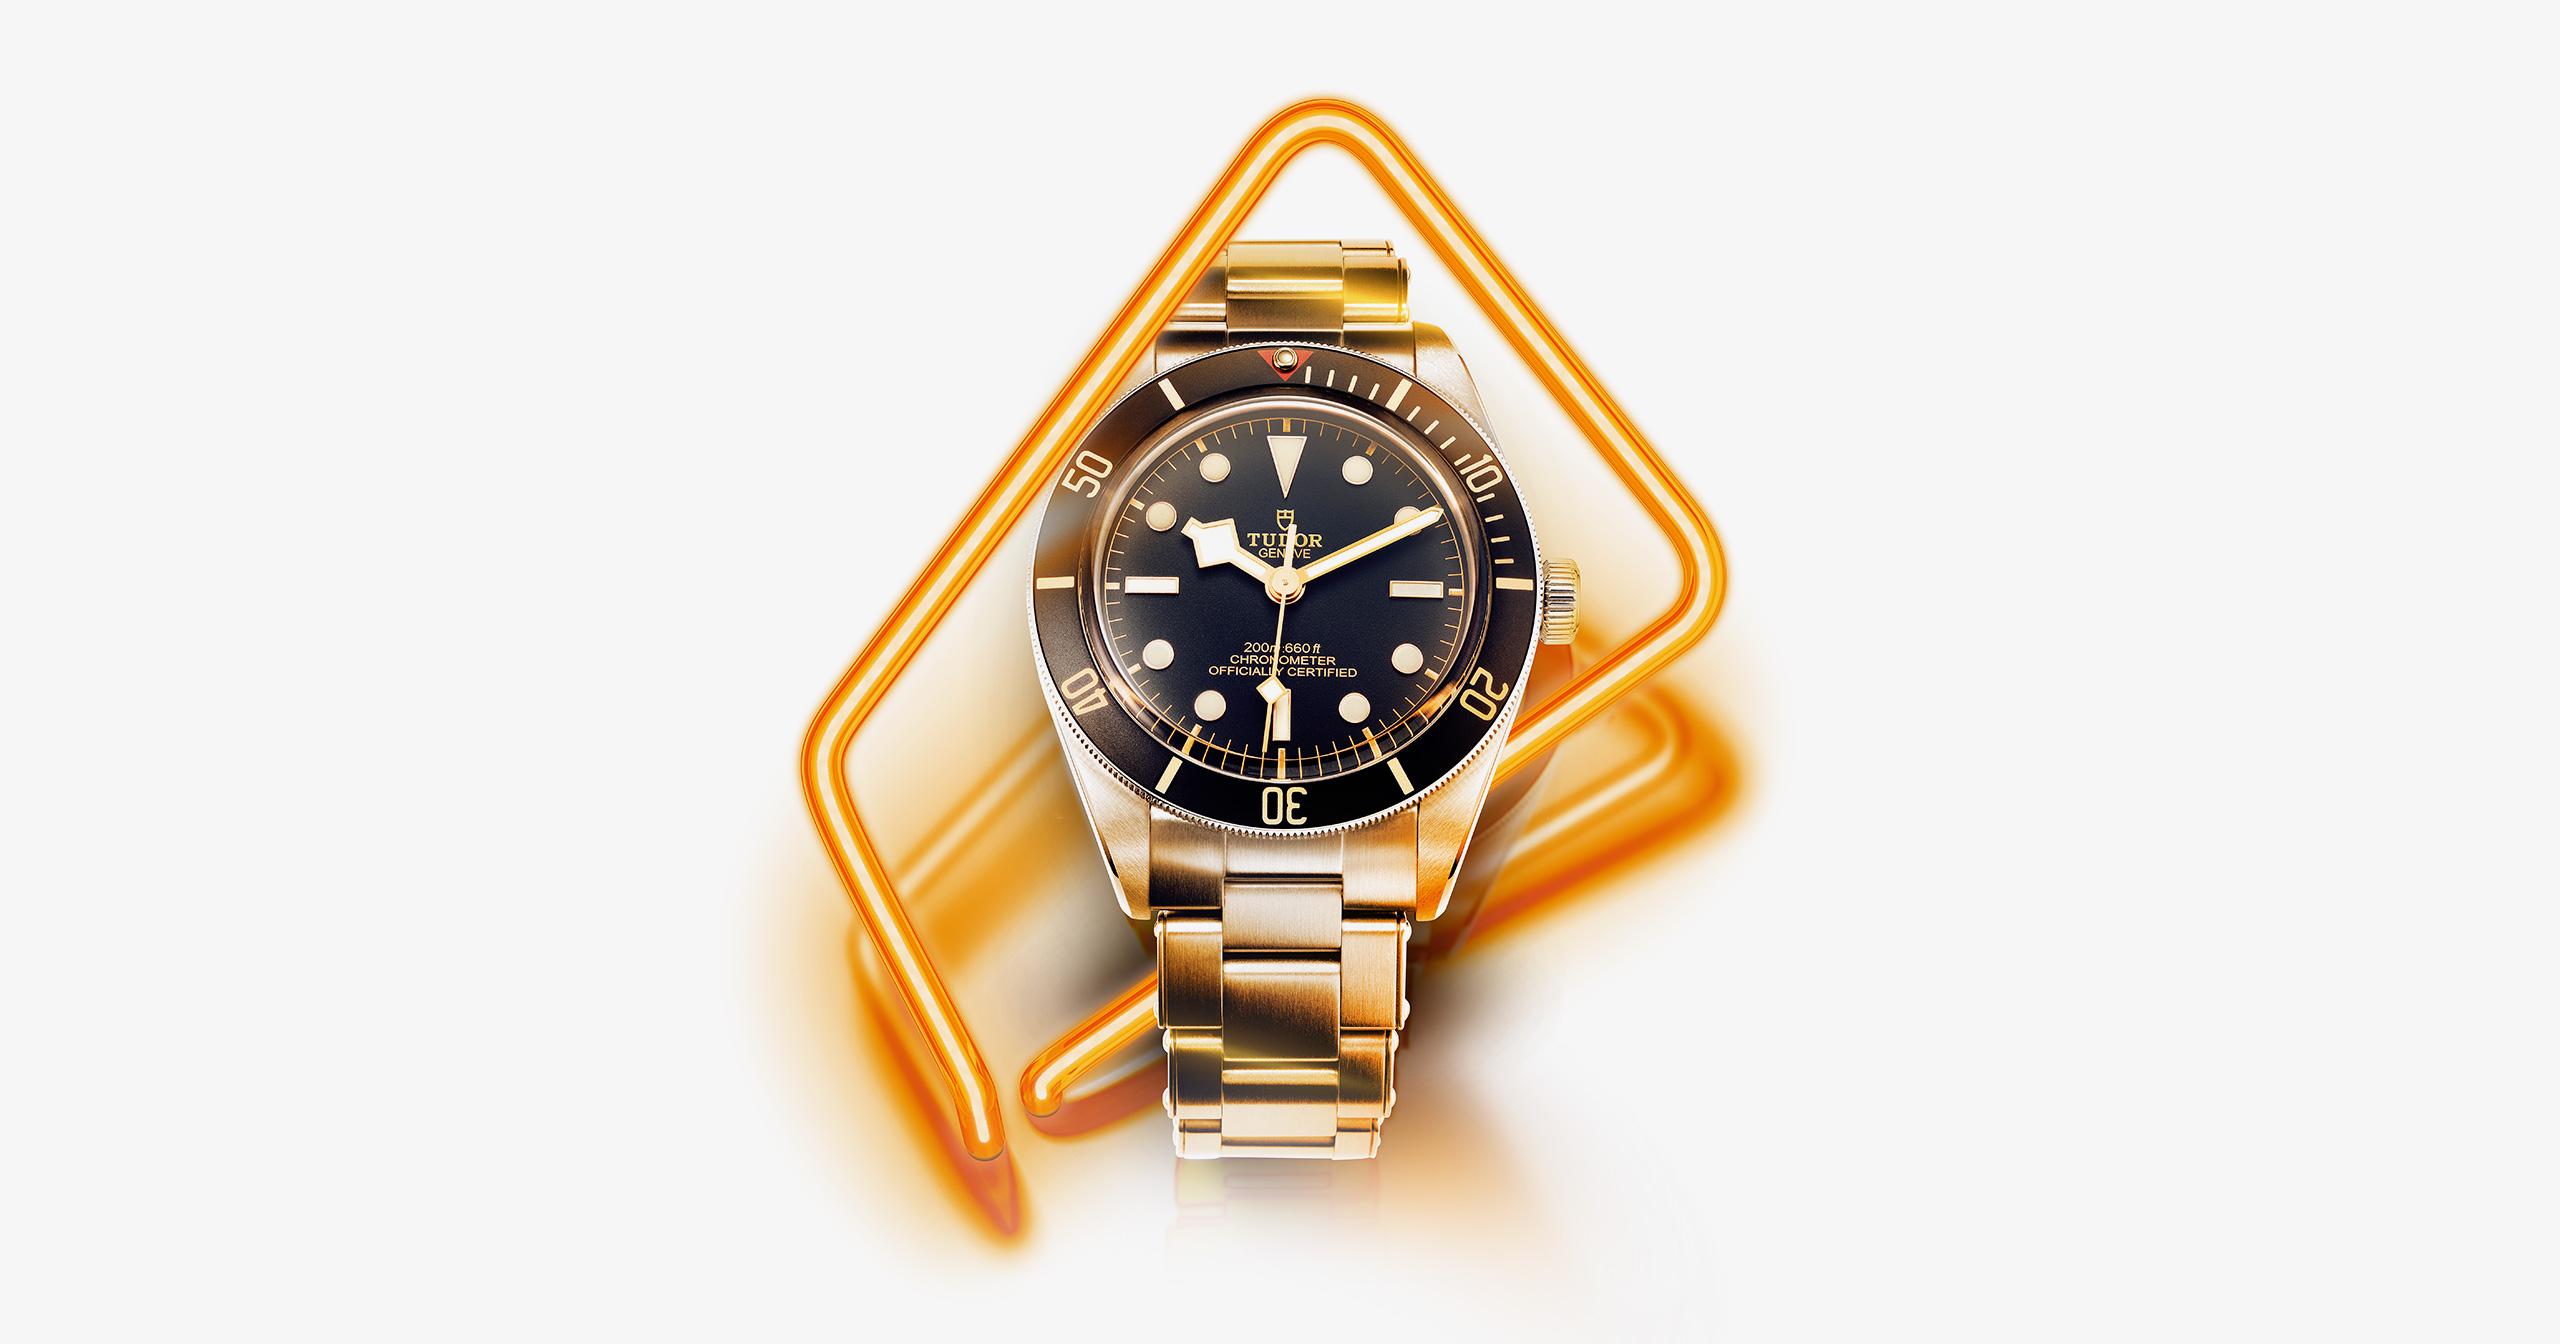 Tudor Watch featuring creative neon lighting and 3D visual effects for magazine cover